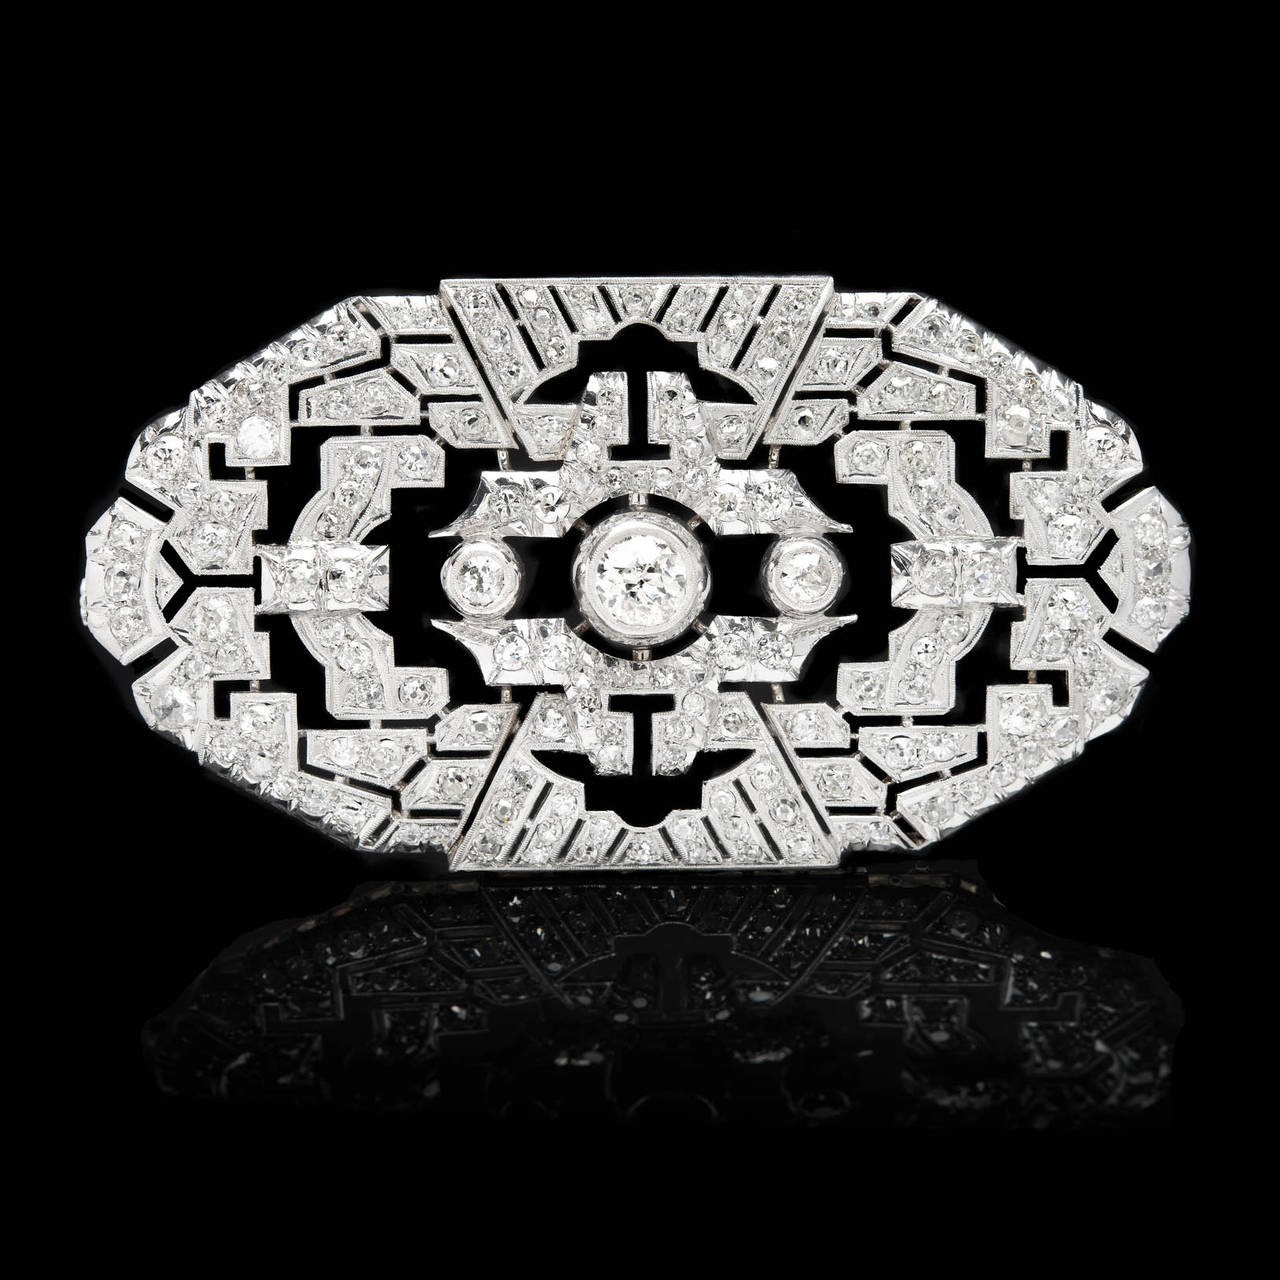 Platinum Diamond Brooch Features One Center Old Mine Cut Diamond, for approximately 1.01 Carats, in a Geometric Setting with Milgrain Detail. The additional 158 old cut diamonds total approximately 5.00 carats. The brooch is 3.25 by 1.75 inches and